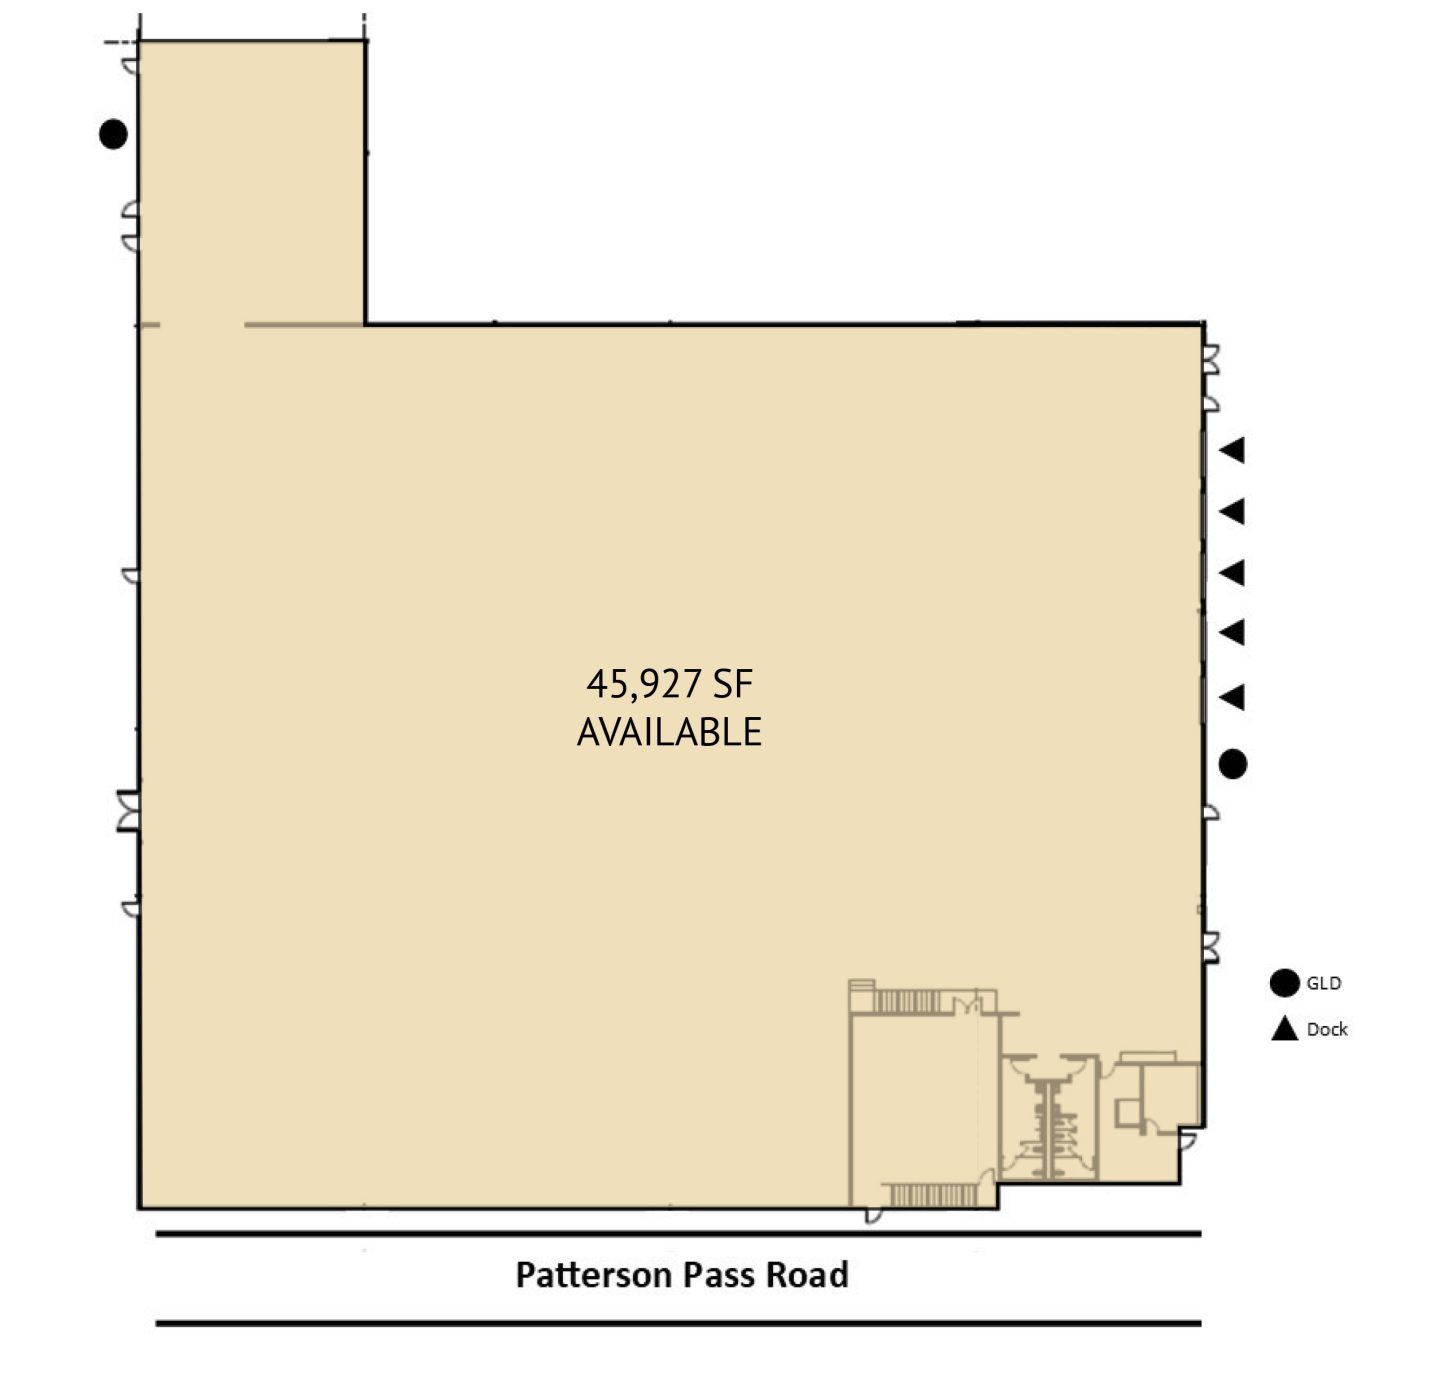 6474 Patterson Pass Road - Photos and floorplans